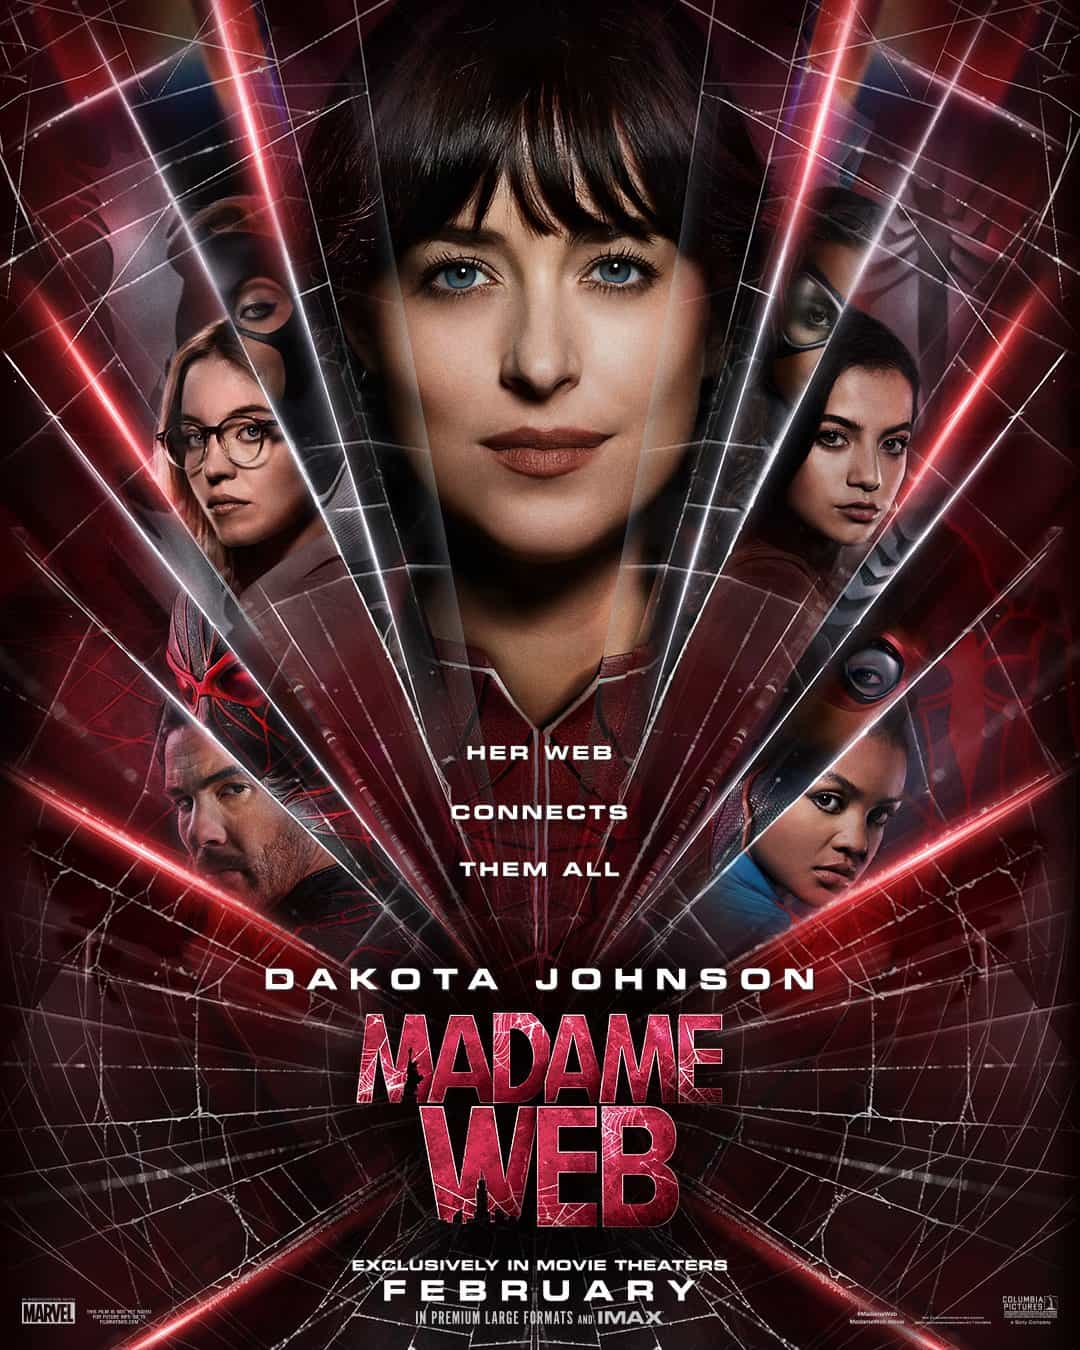 Check out the new trailer for upcoming movie Madame Web which stars Dakota Johnson and Emma Roberts - movie UK release date 16th February 2024 #madameweb